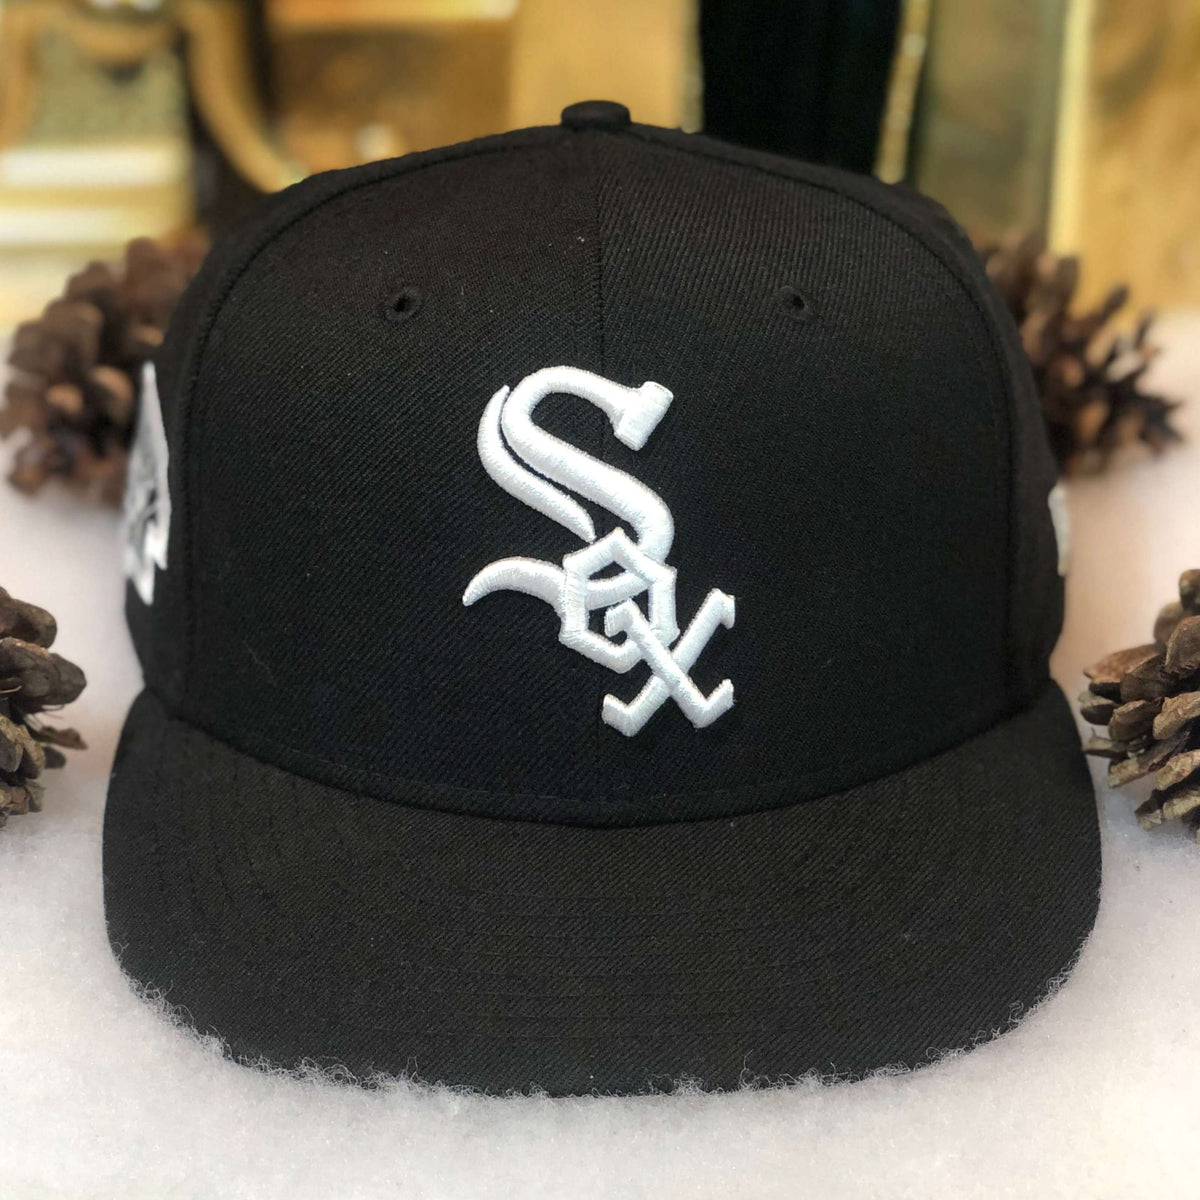 Chicago White Sox Fitted Hat Size 7 1/4